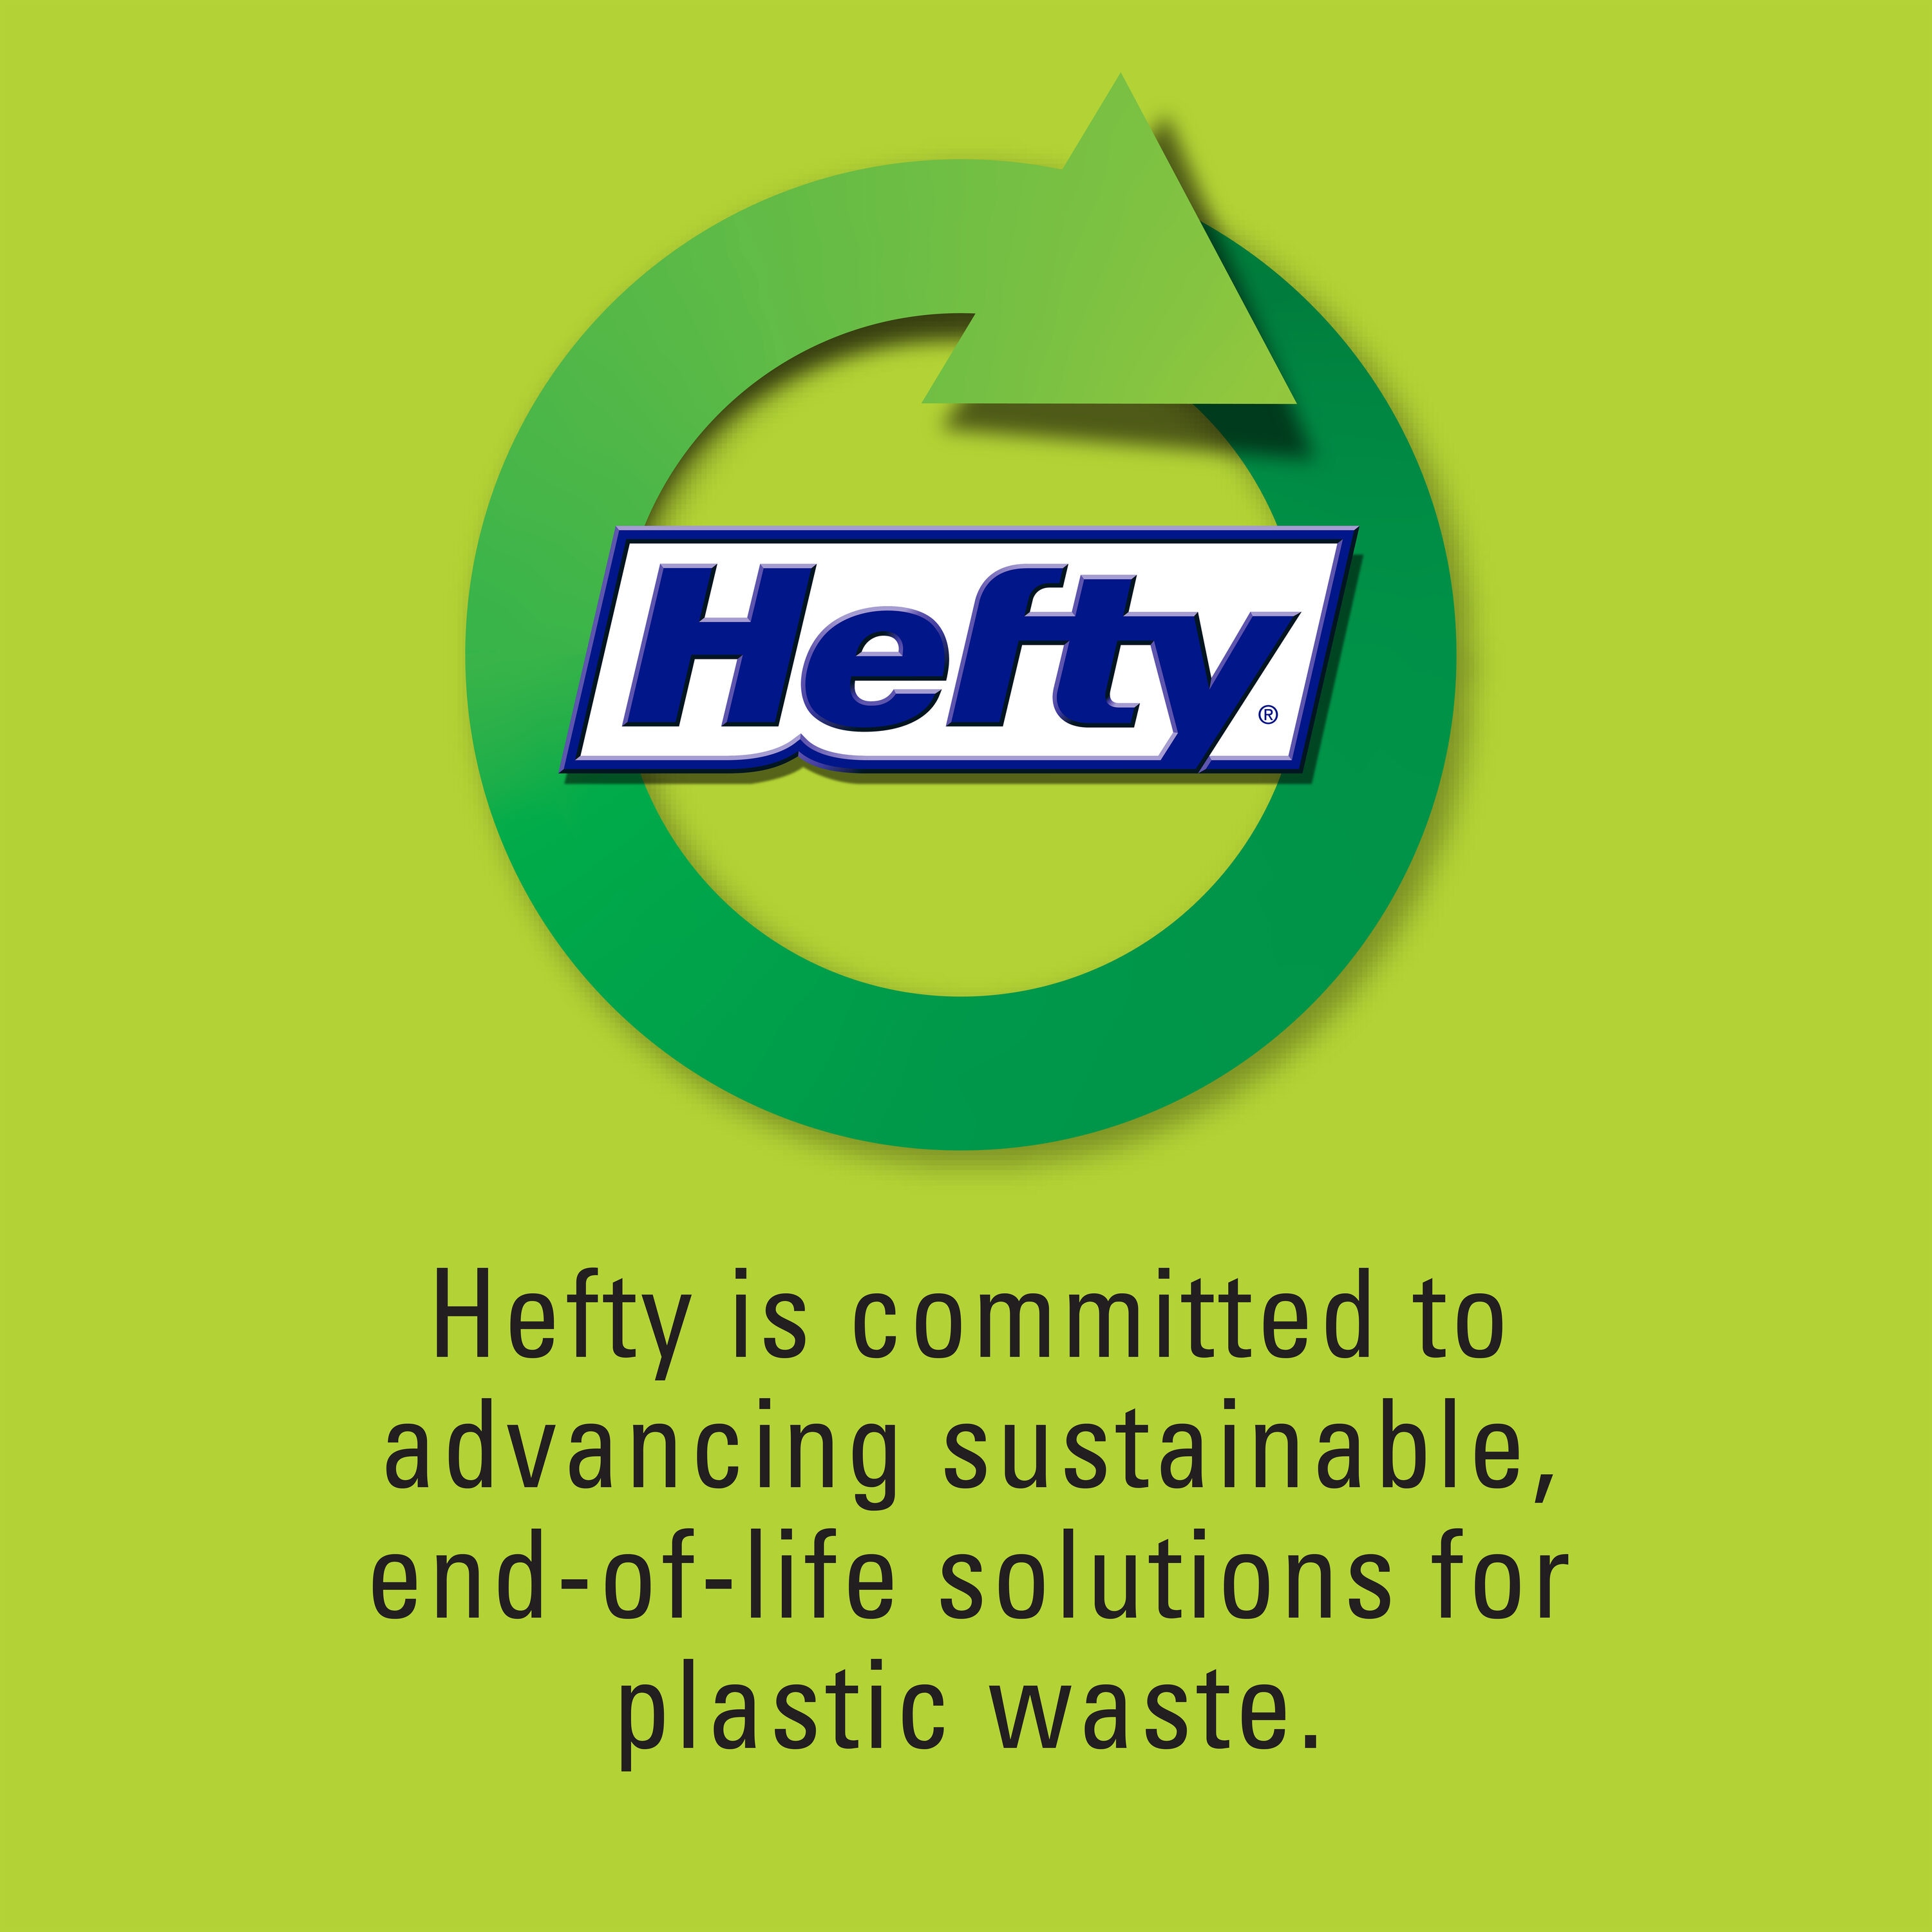 Hefty Ultra Strong White Pine Breeze Scent Trash Bags